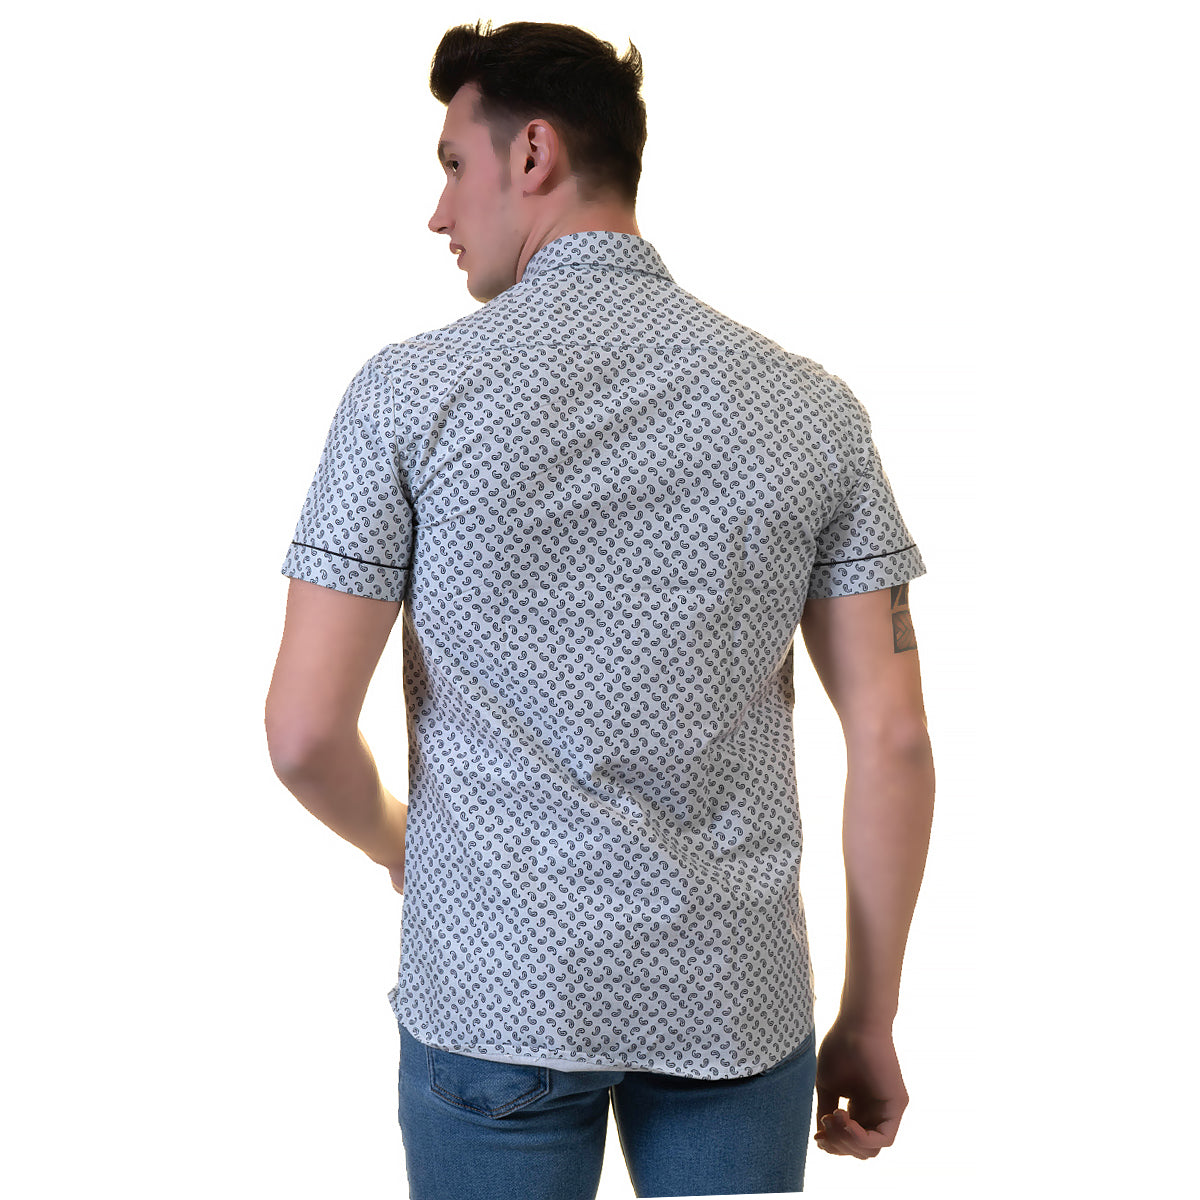 Grey Mens Short Sleeve Button up Shirts - Tailored Slim Fit Cotton Dress Shirts